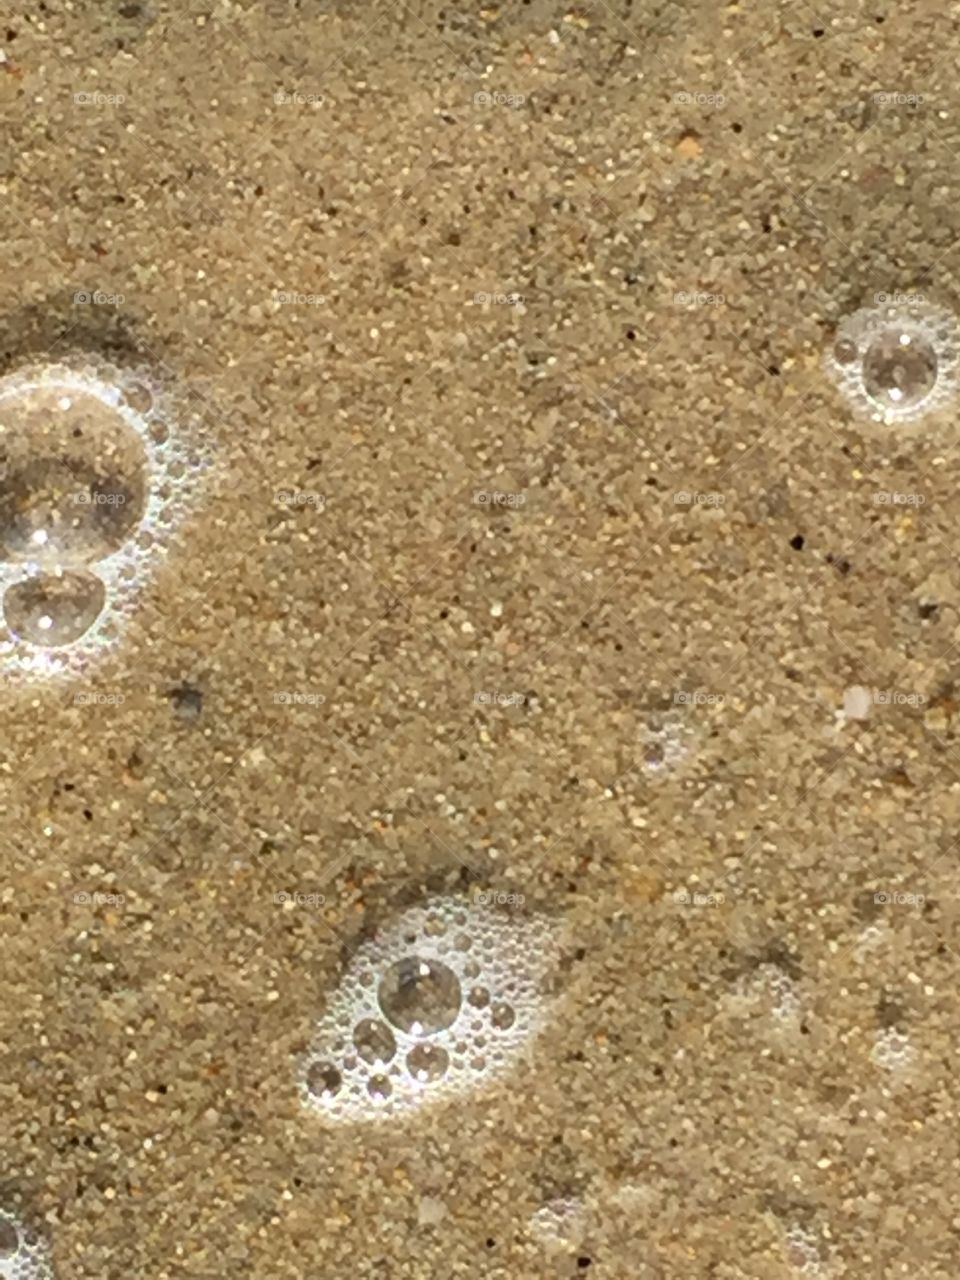 Bubbles in the sand